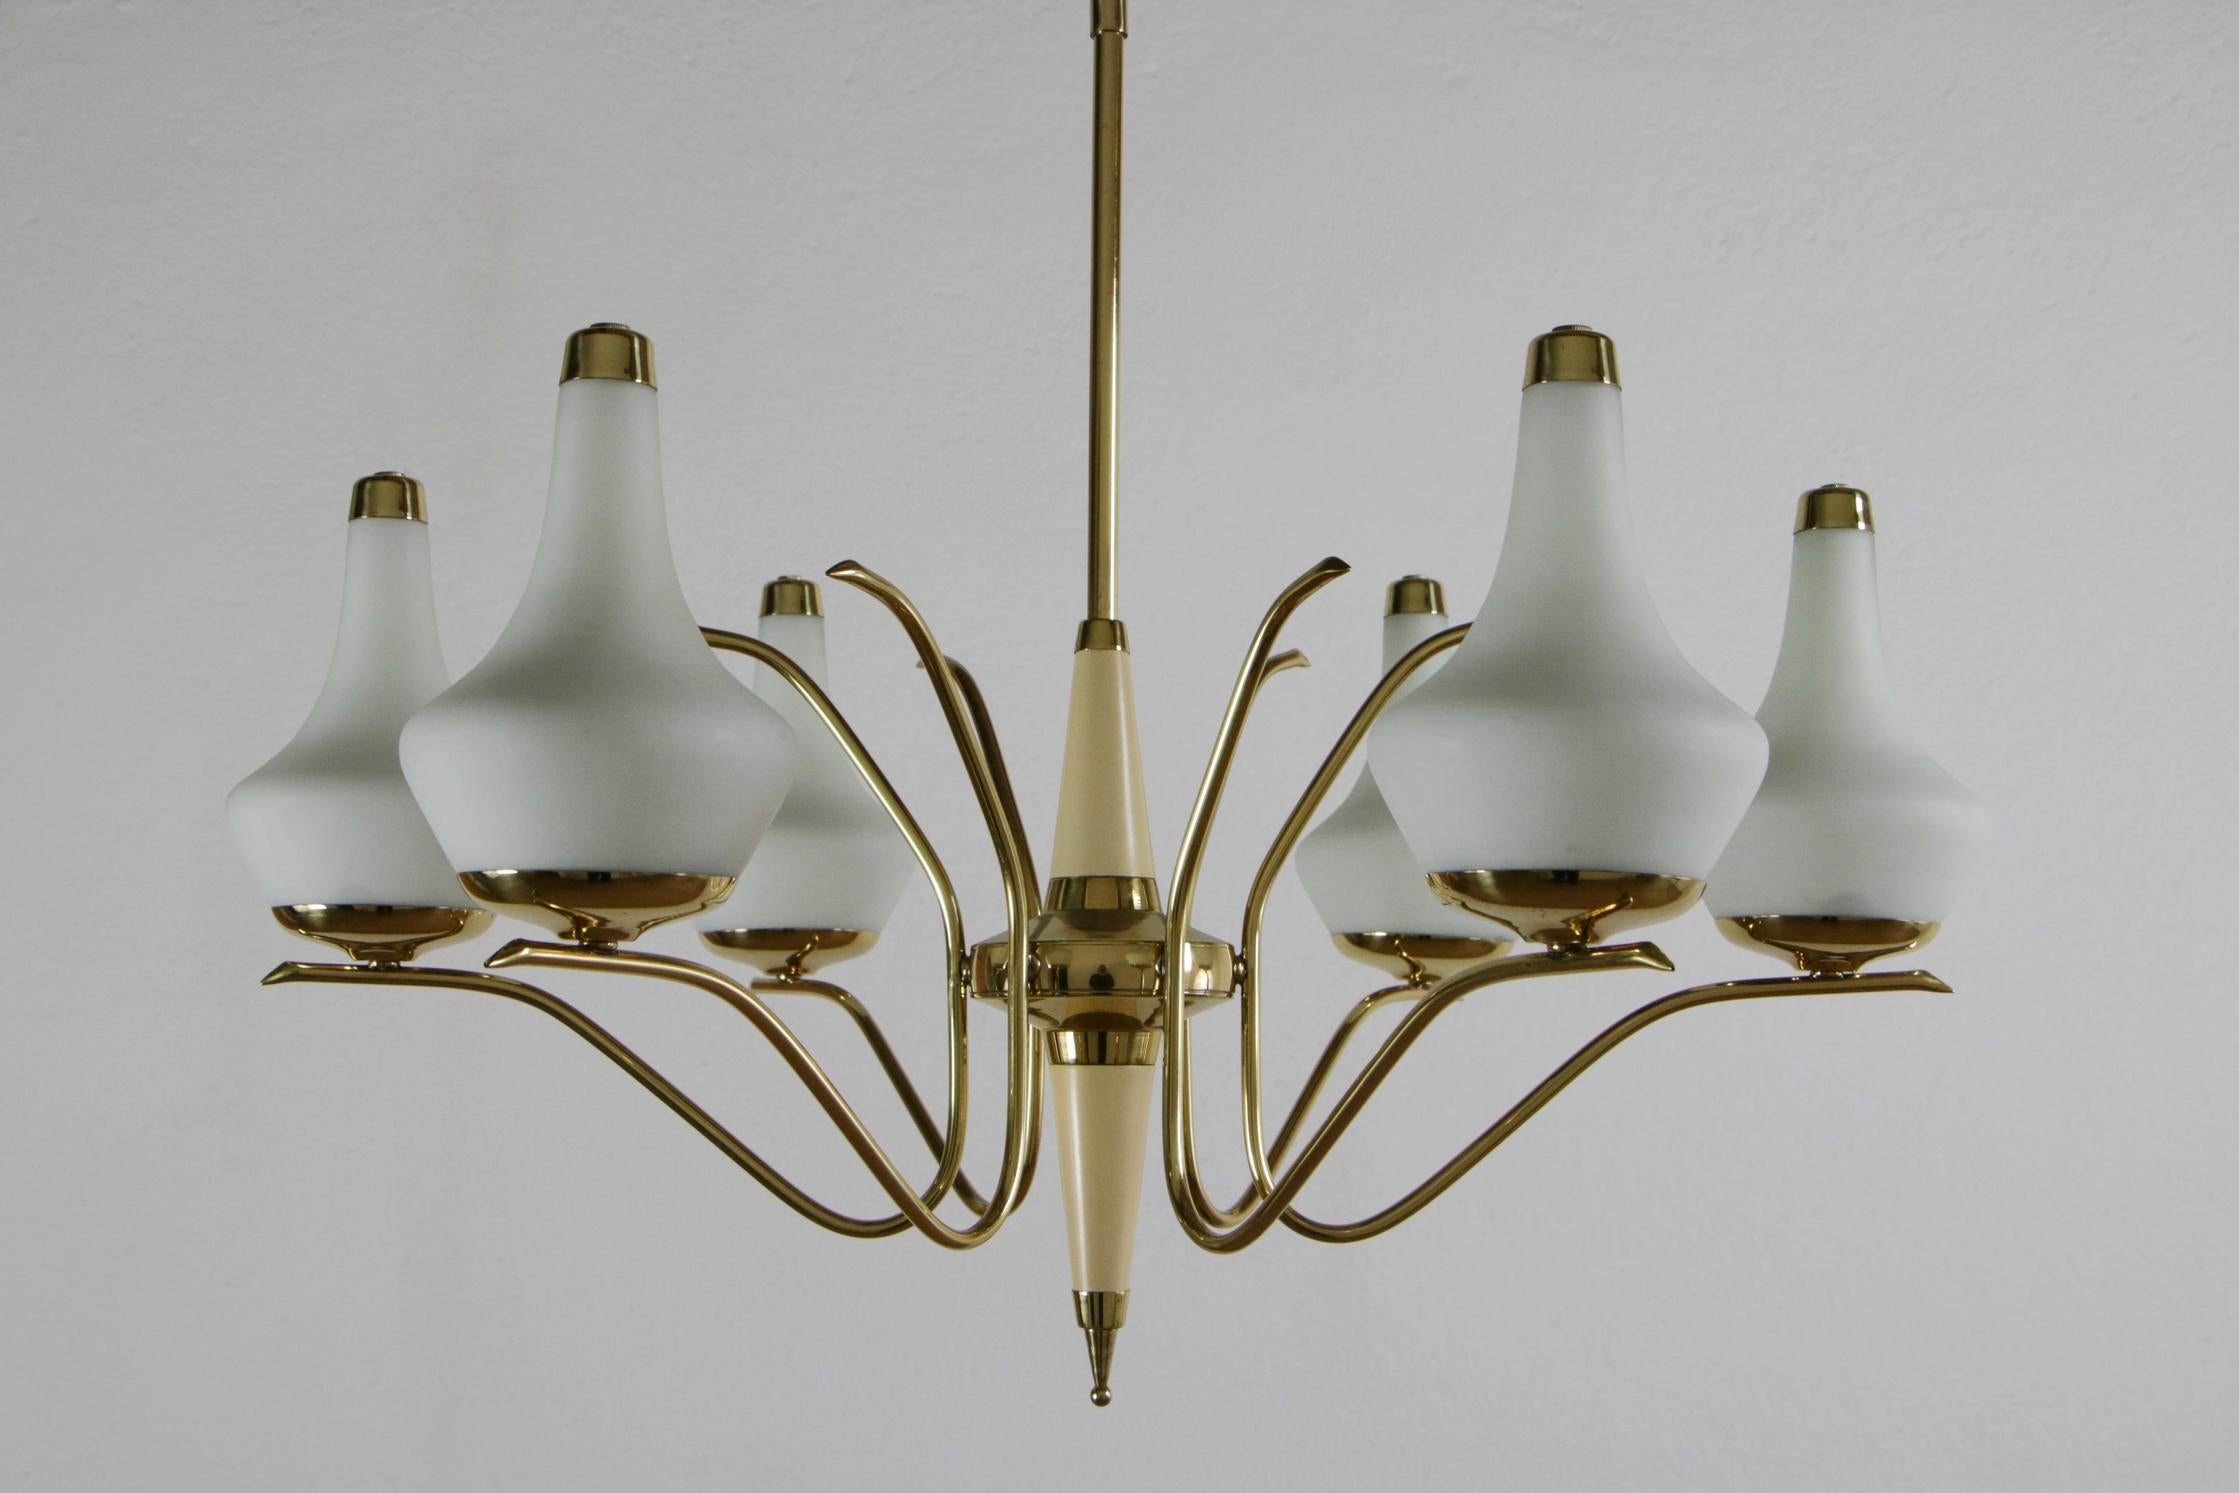 Italian Midcentury Six Lights Gold and Ivory Chandelier Attributed to Stilnovo For Sale 2